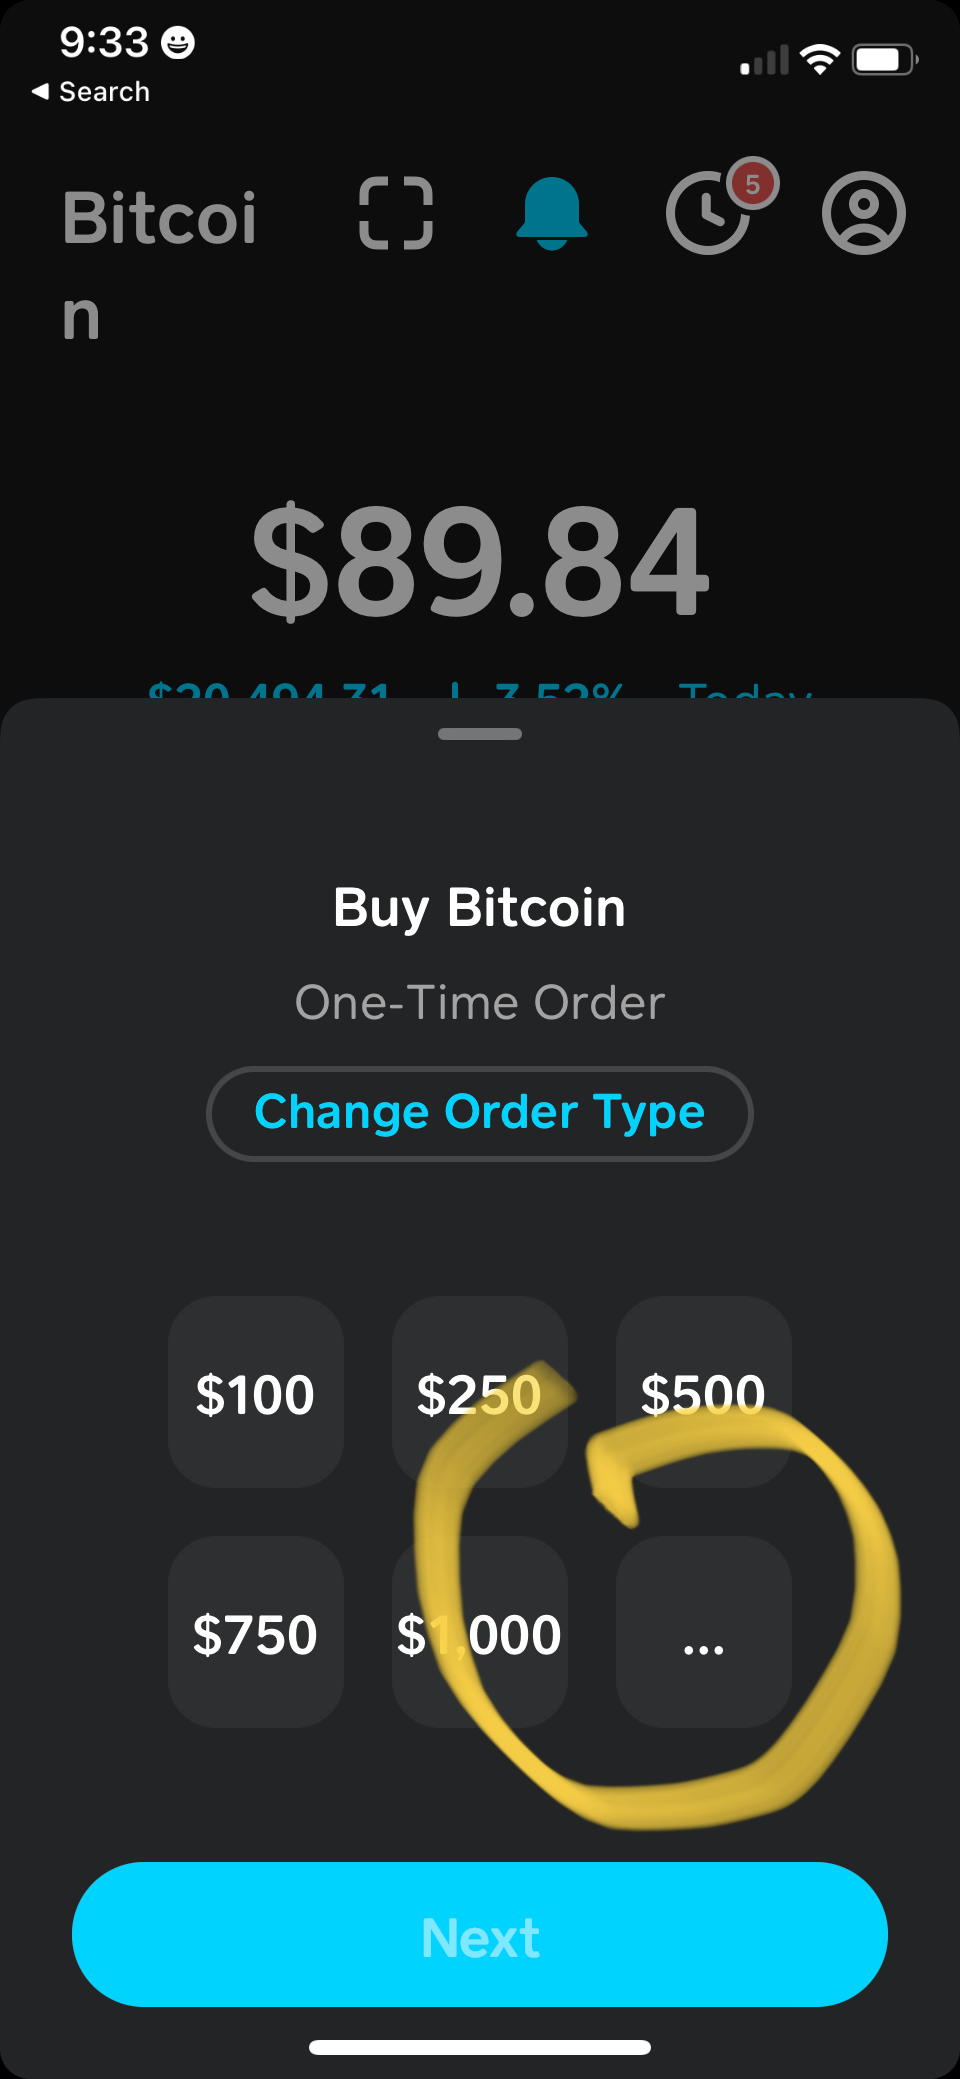 Get Started Using Bitcoin